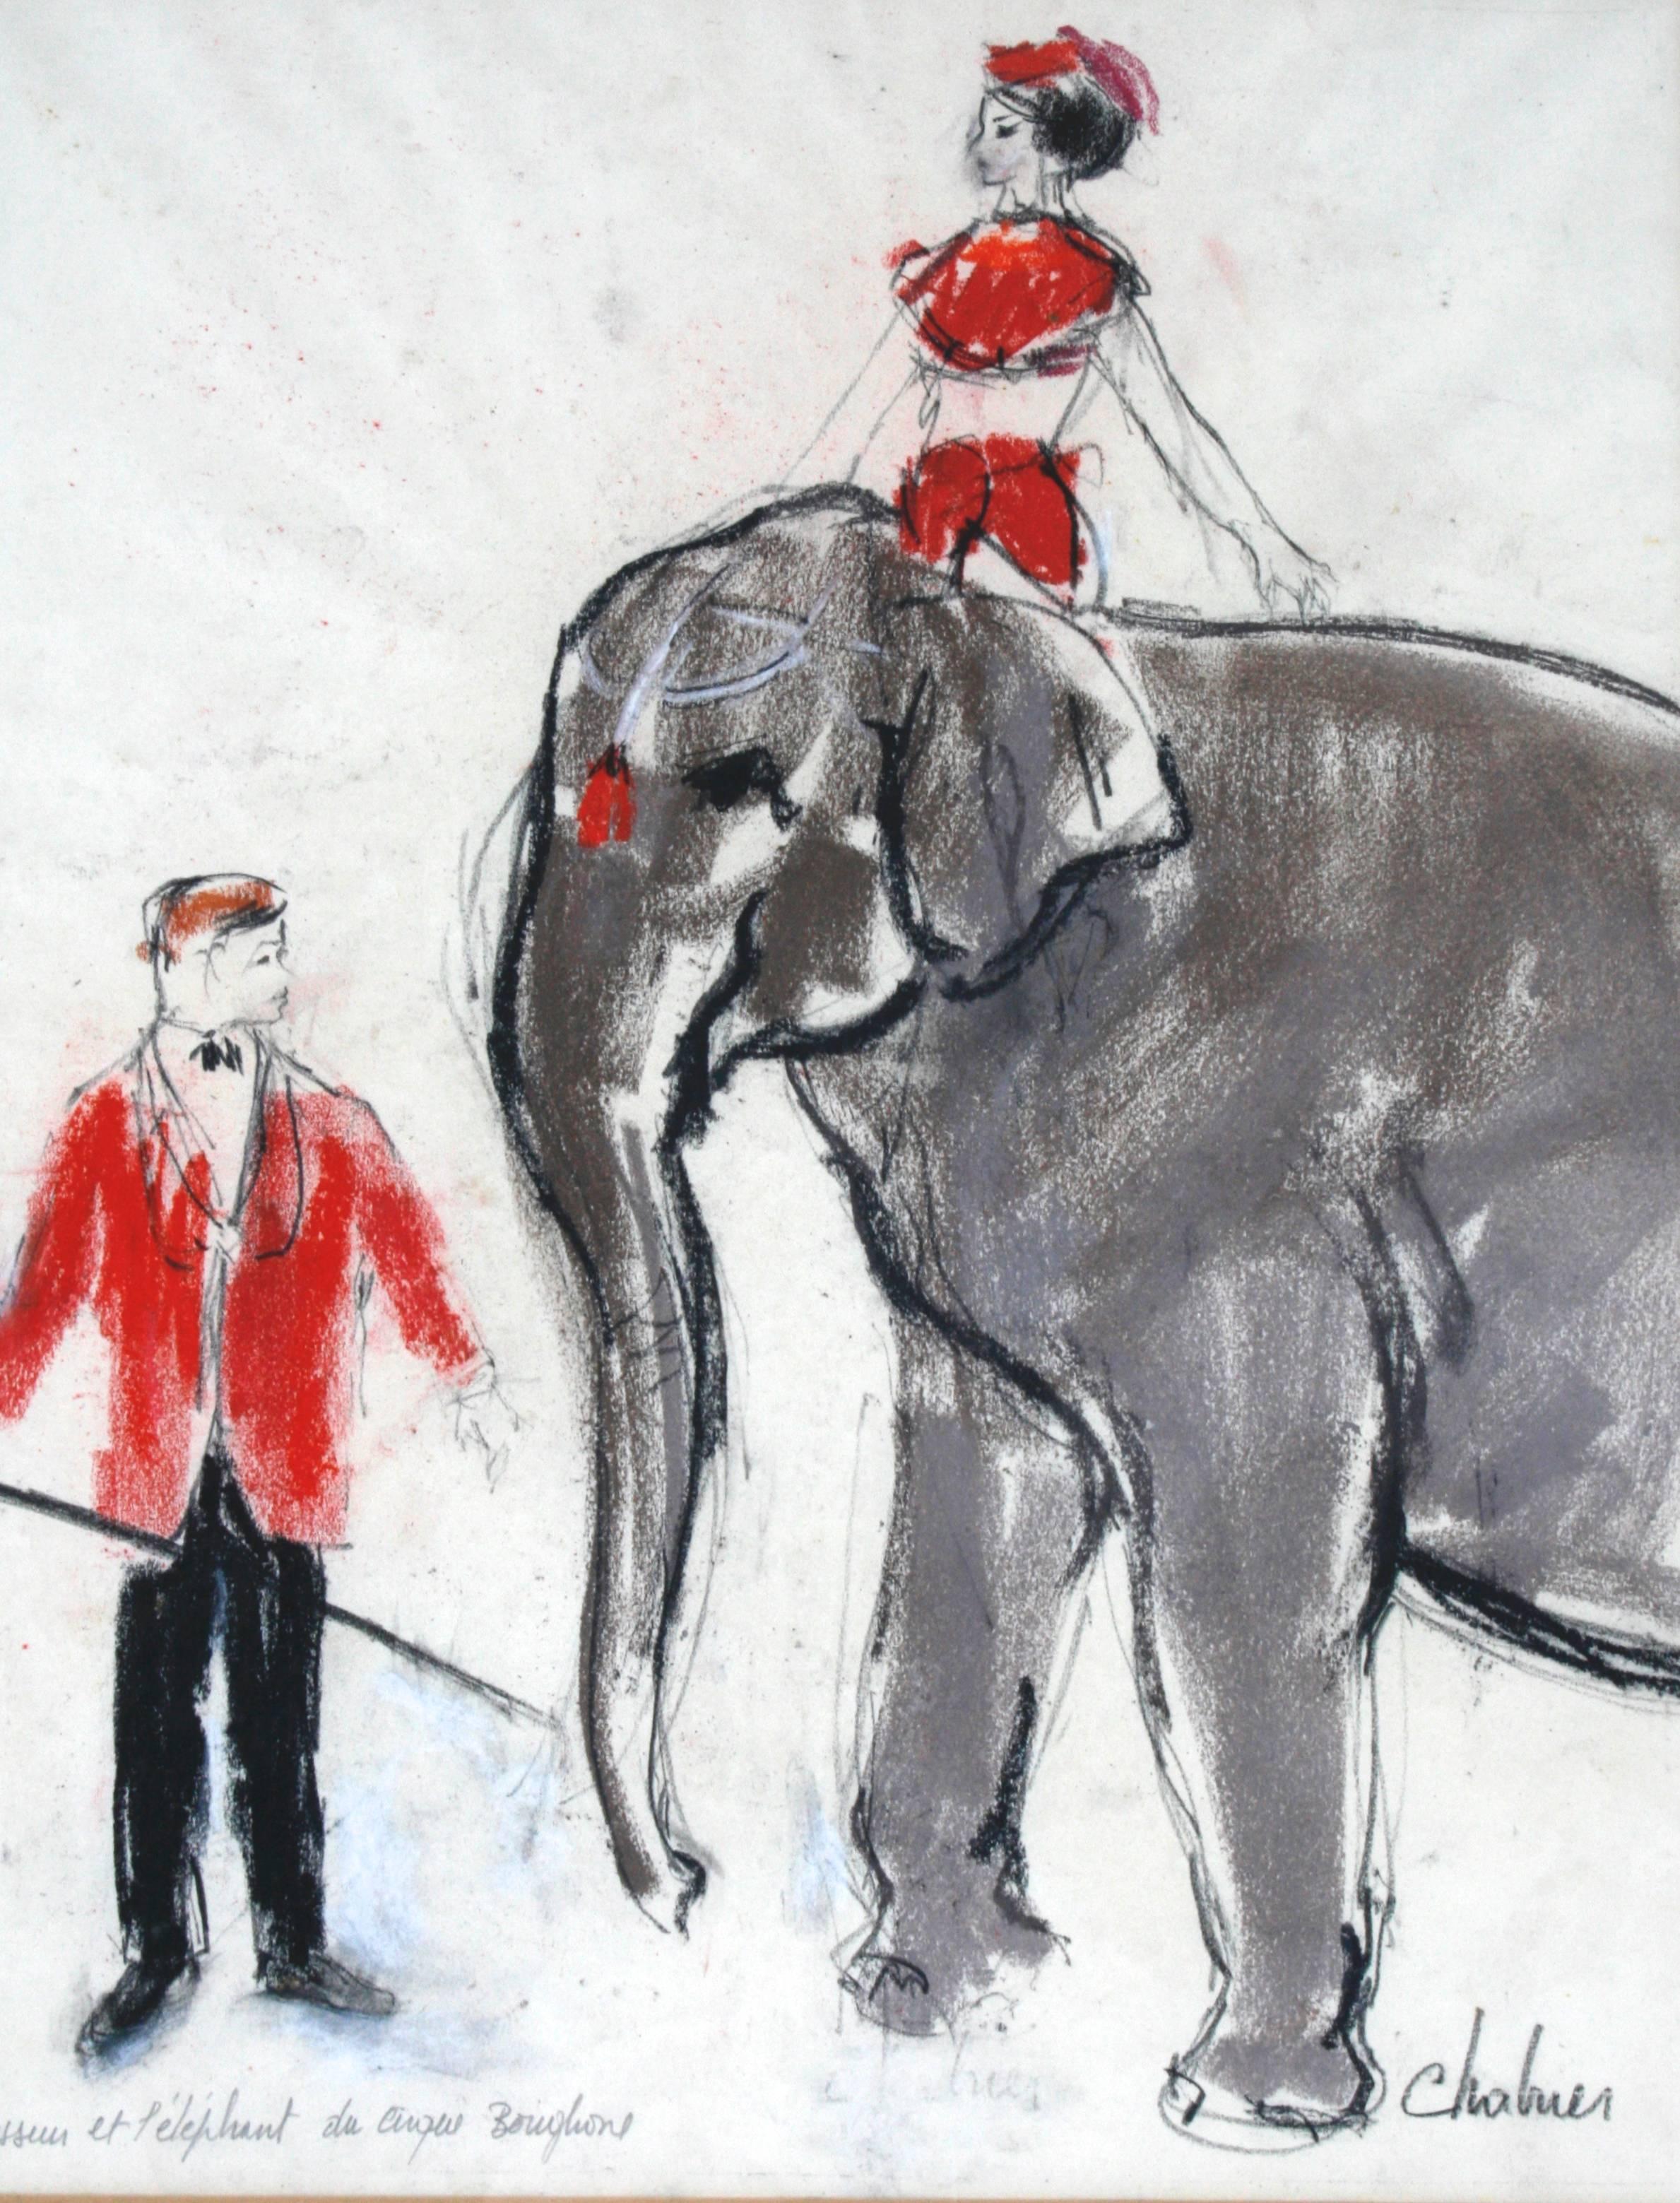 Le Dresseur et l'Eléphant du Cirque Bouglione (The Elephant Trainer at The Circus Bouglione) is a w/c and pastel Illustration by André Legrand-Chabrier. André Legrand-Chabrier (1876-1945) was a French novelist, journalist, illustrator and chronicler